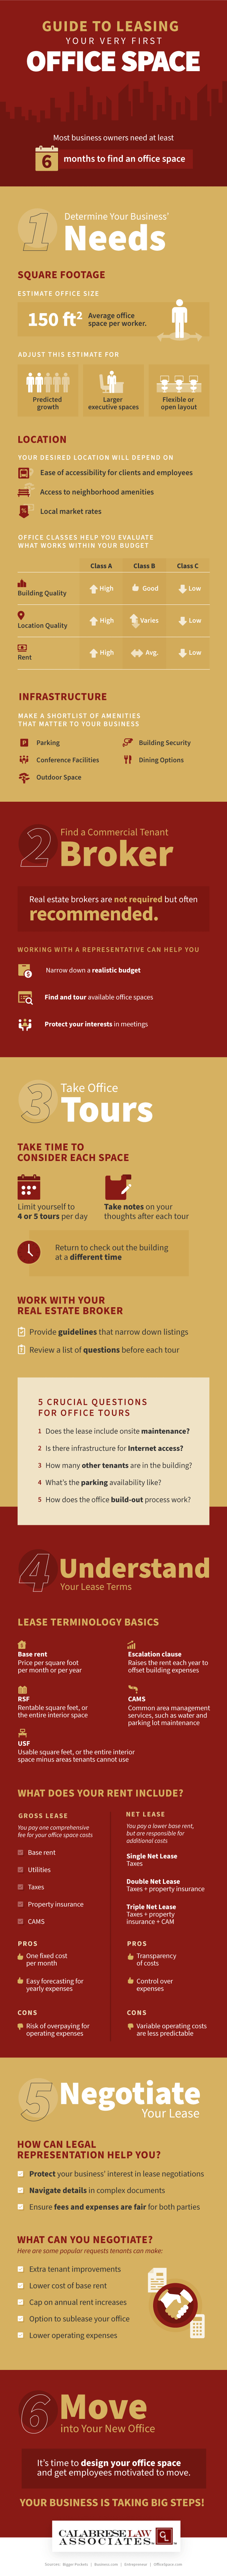 Guide to Leasing Your Very First Office Space Infographic